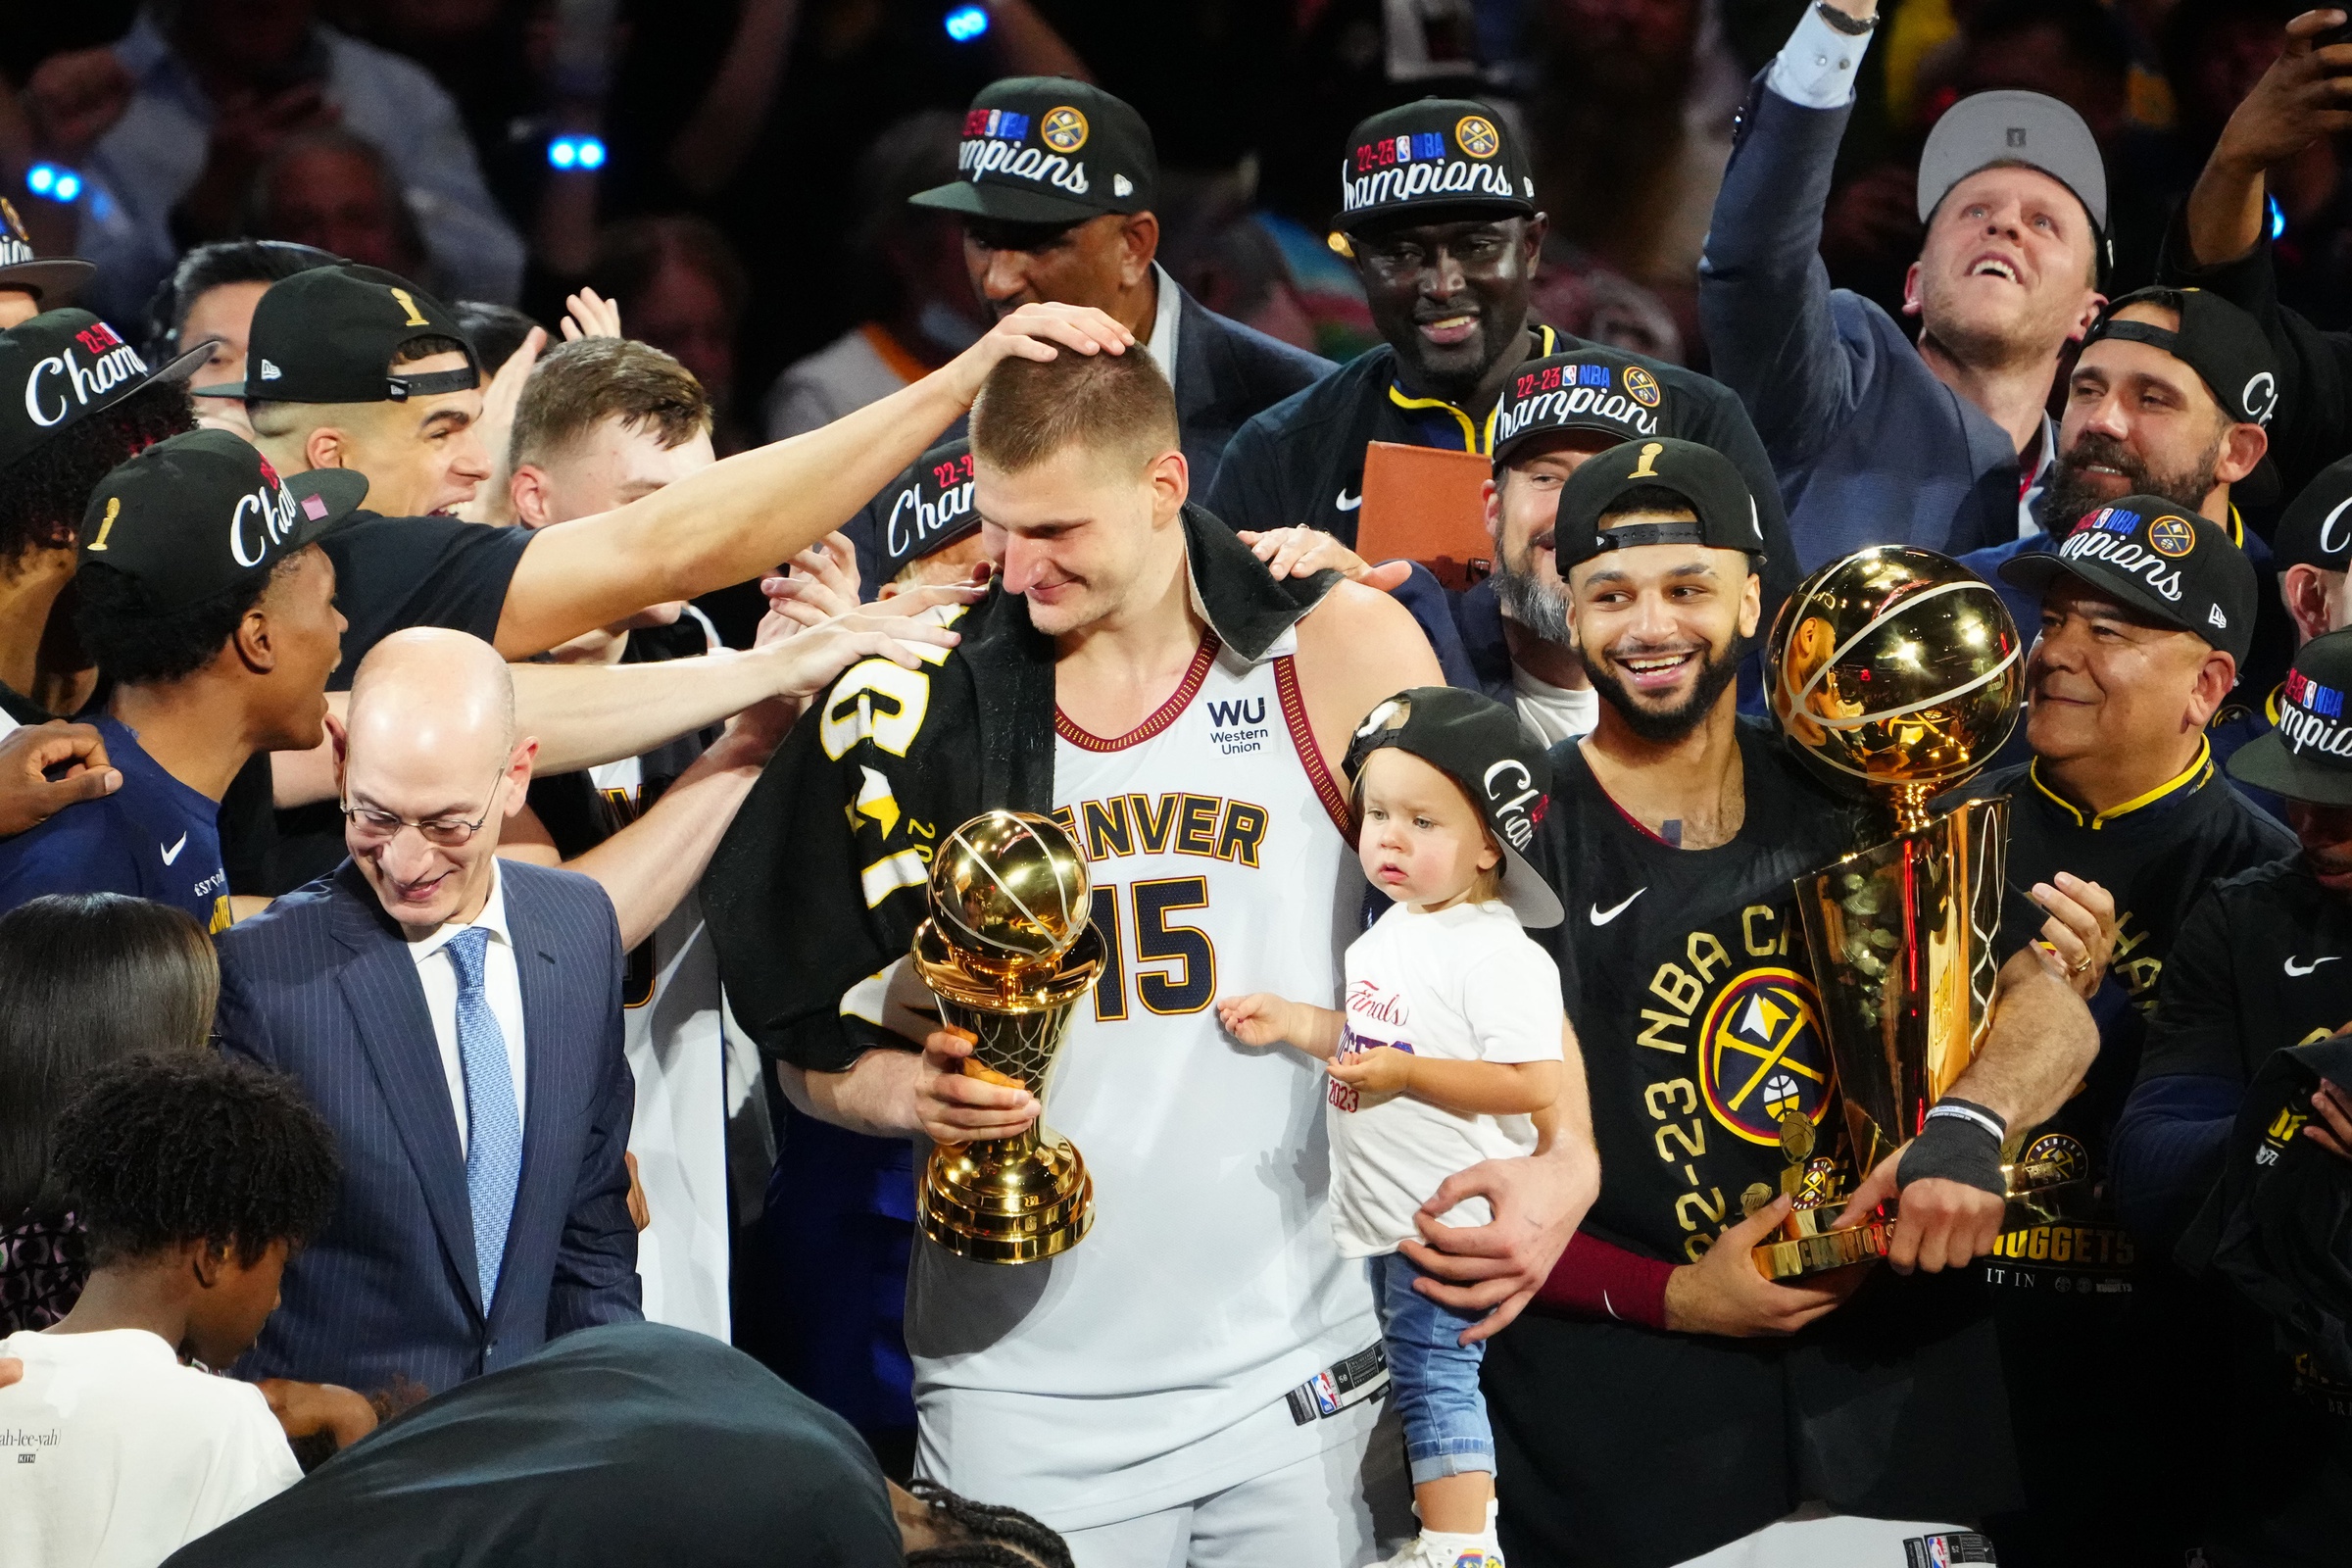 Jun 12, 2023; Denver, Colorado, USA; Denver Nuggets center Nikola Jokic (15) holds his daughter as he celebrates winning the Bill Russell NBA Finals MVP Award after the Nuggets won the 2023 NBA Championship against the Miami Heat at Ball Arena. Mandatory Credit: Ron Chenoy-USA TODAY Sports